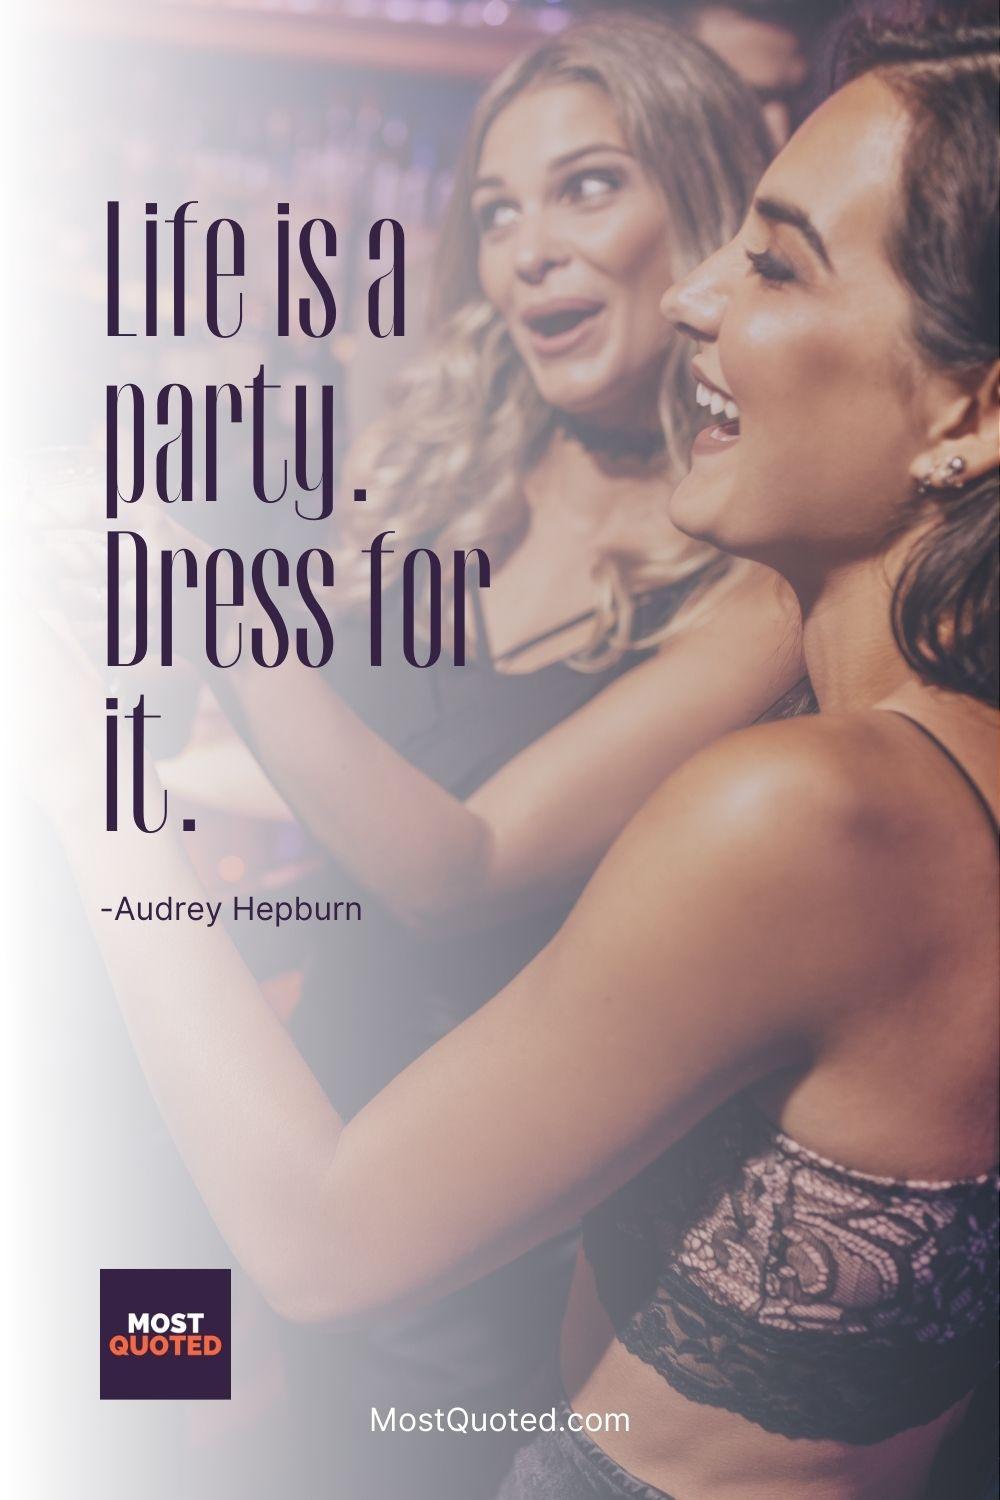 Life is a party. Dress for it. - Audrey Hepburn